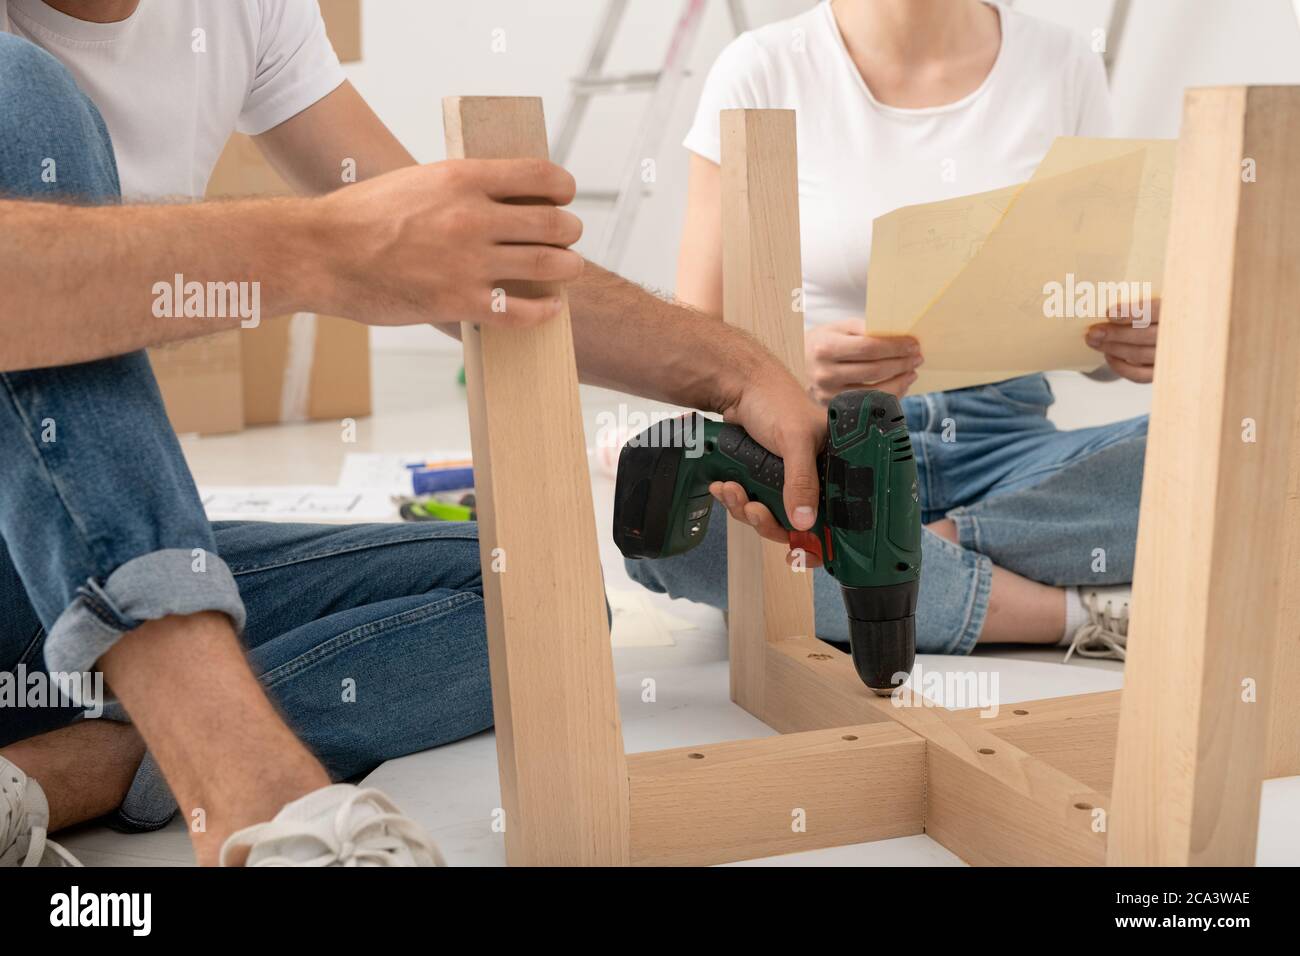 Close-up of unrecognizable man sitting on floor and using screwdriver while assembling table with wife Stock Photo